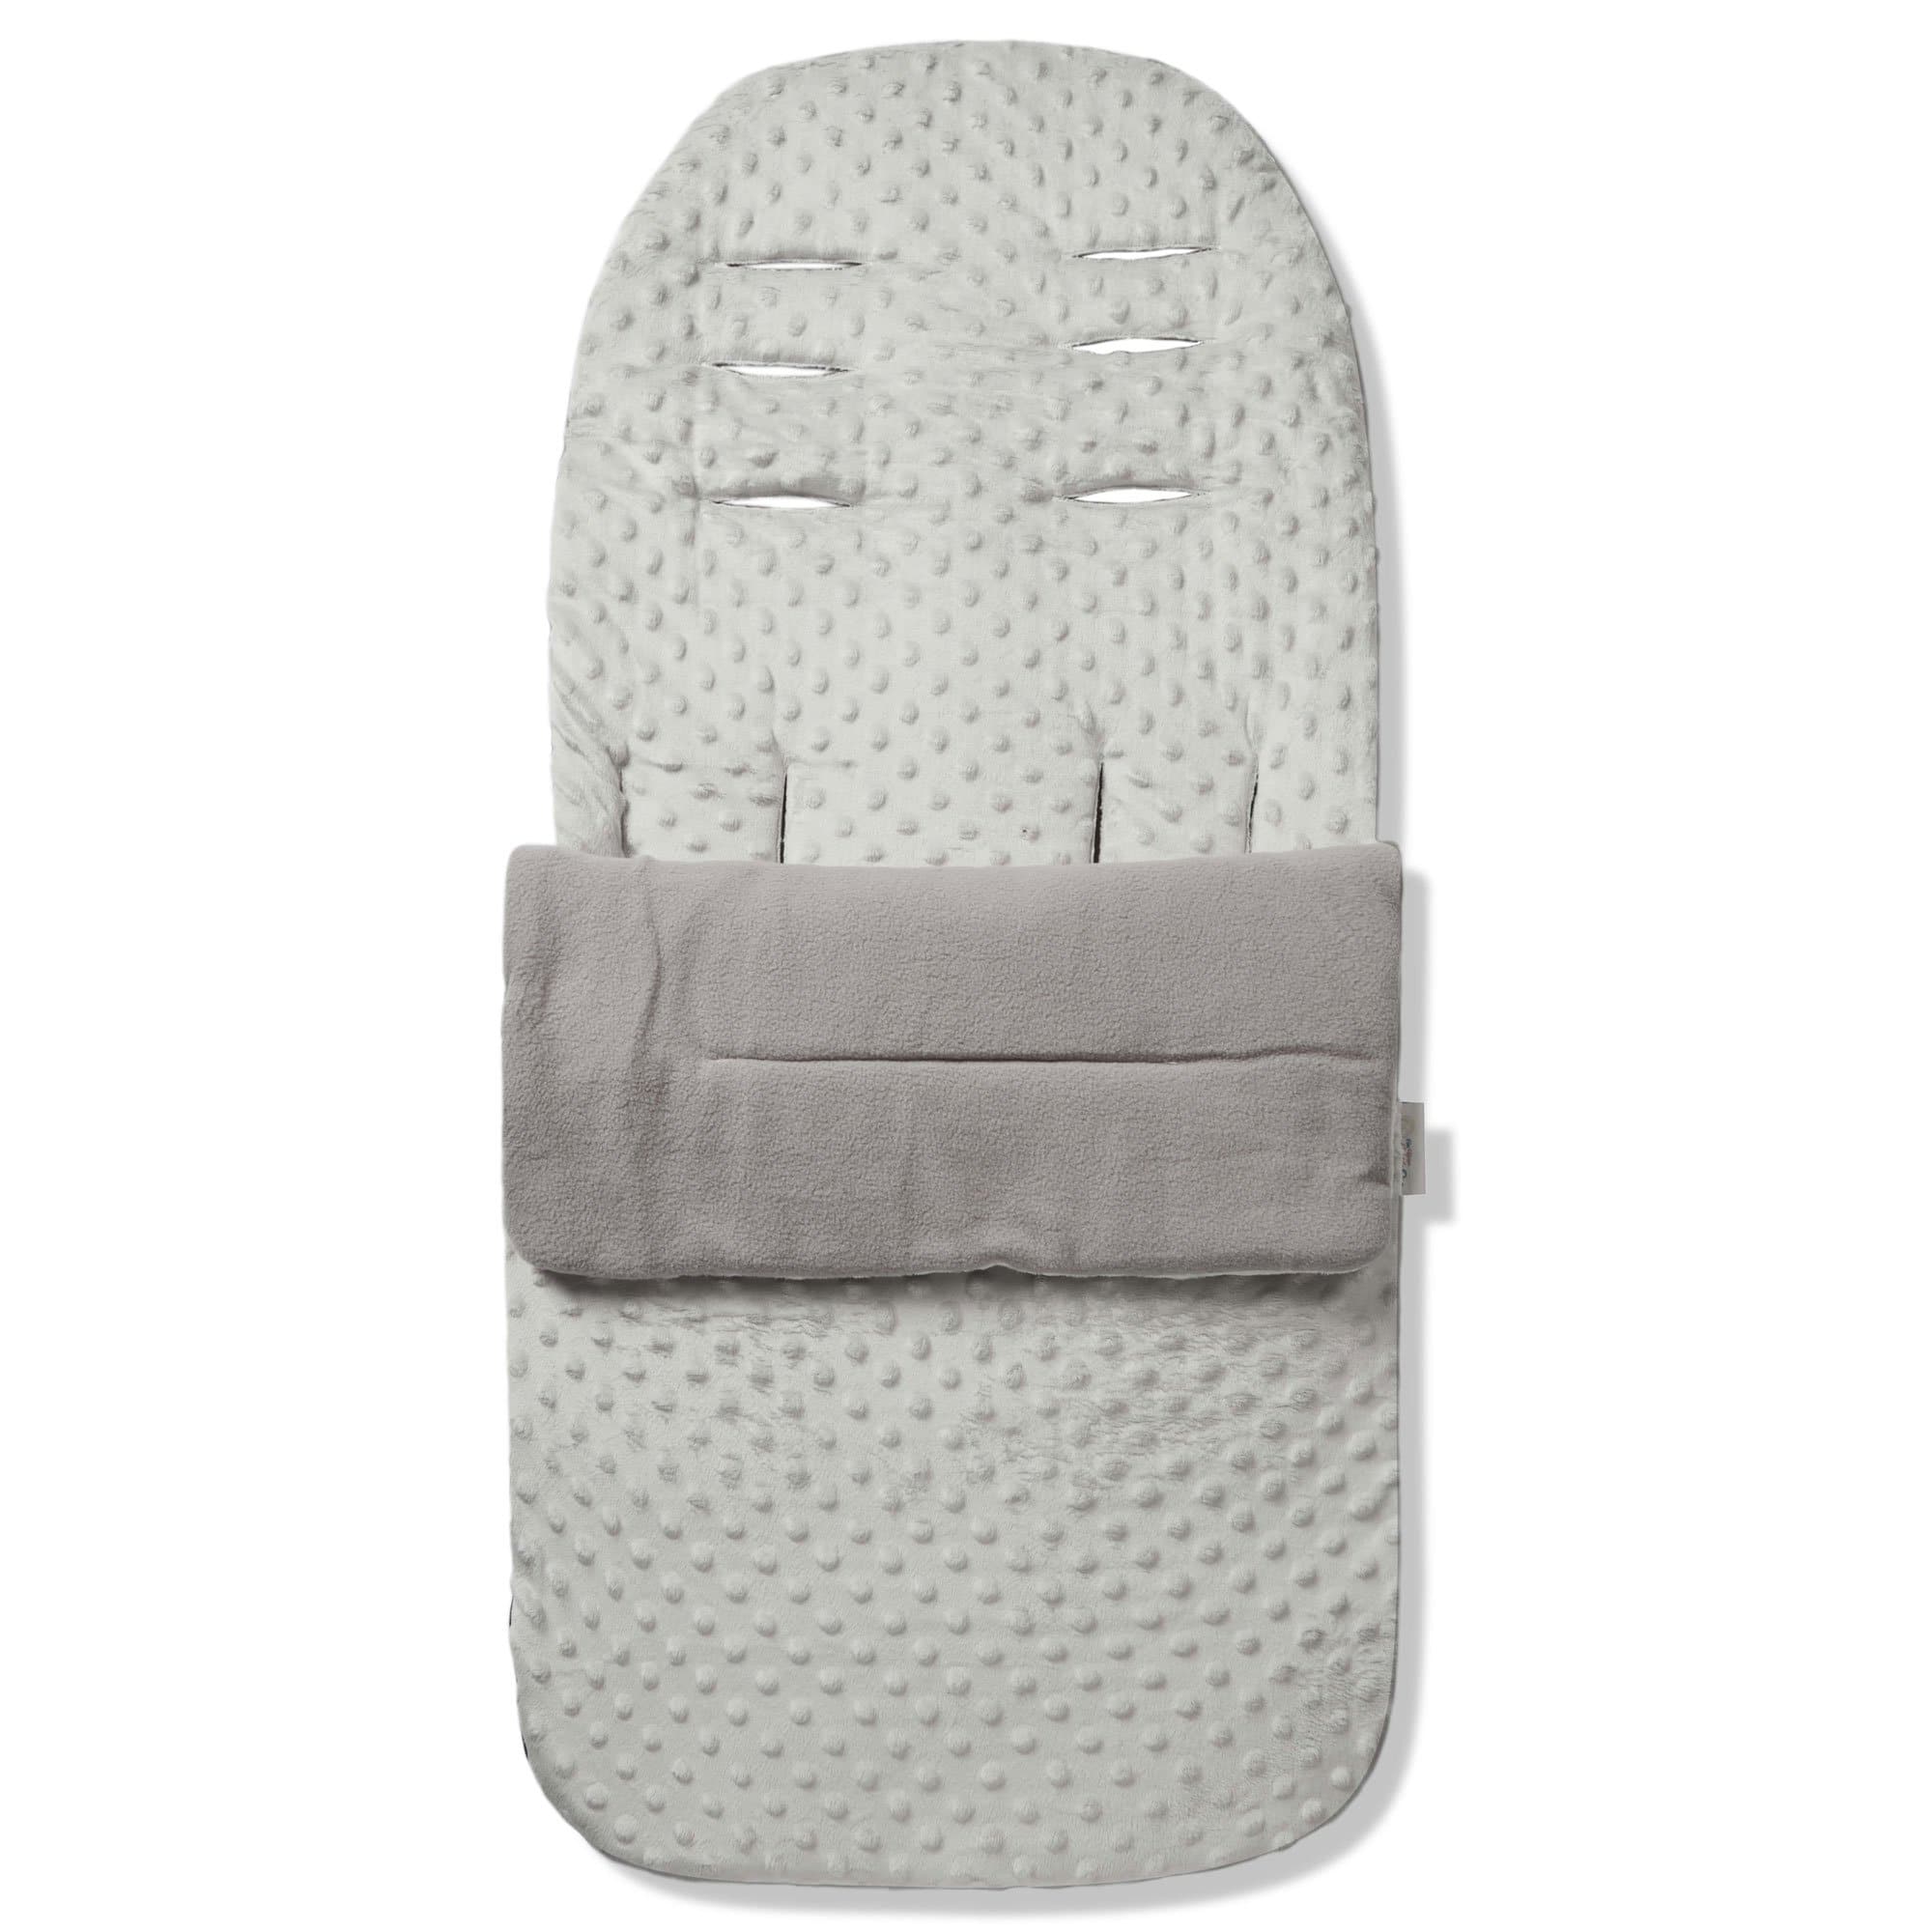 Dimple Footmuff / Cosy Toes Compatible with Kiddicare - For Your Little One